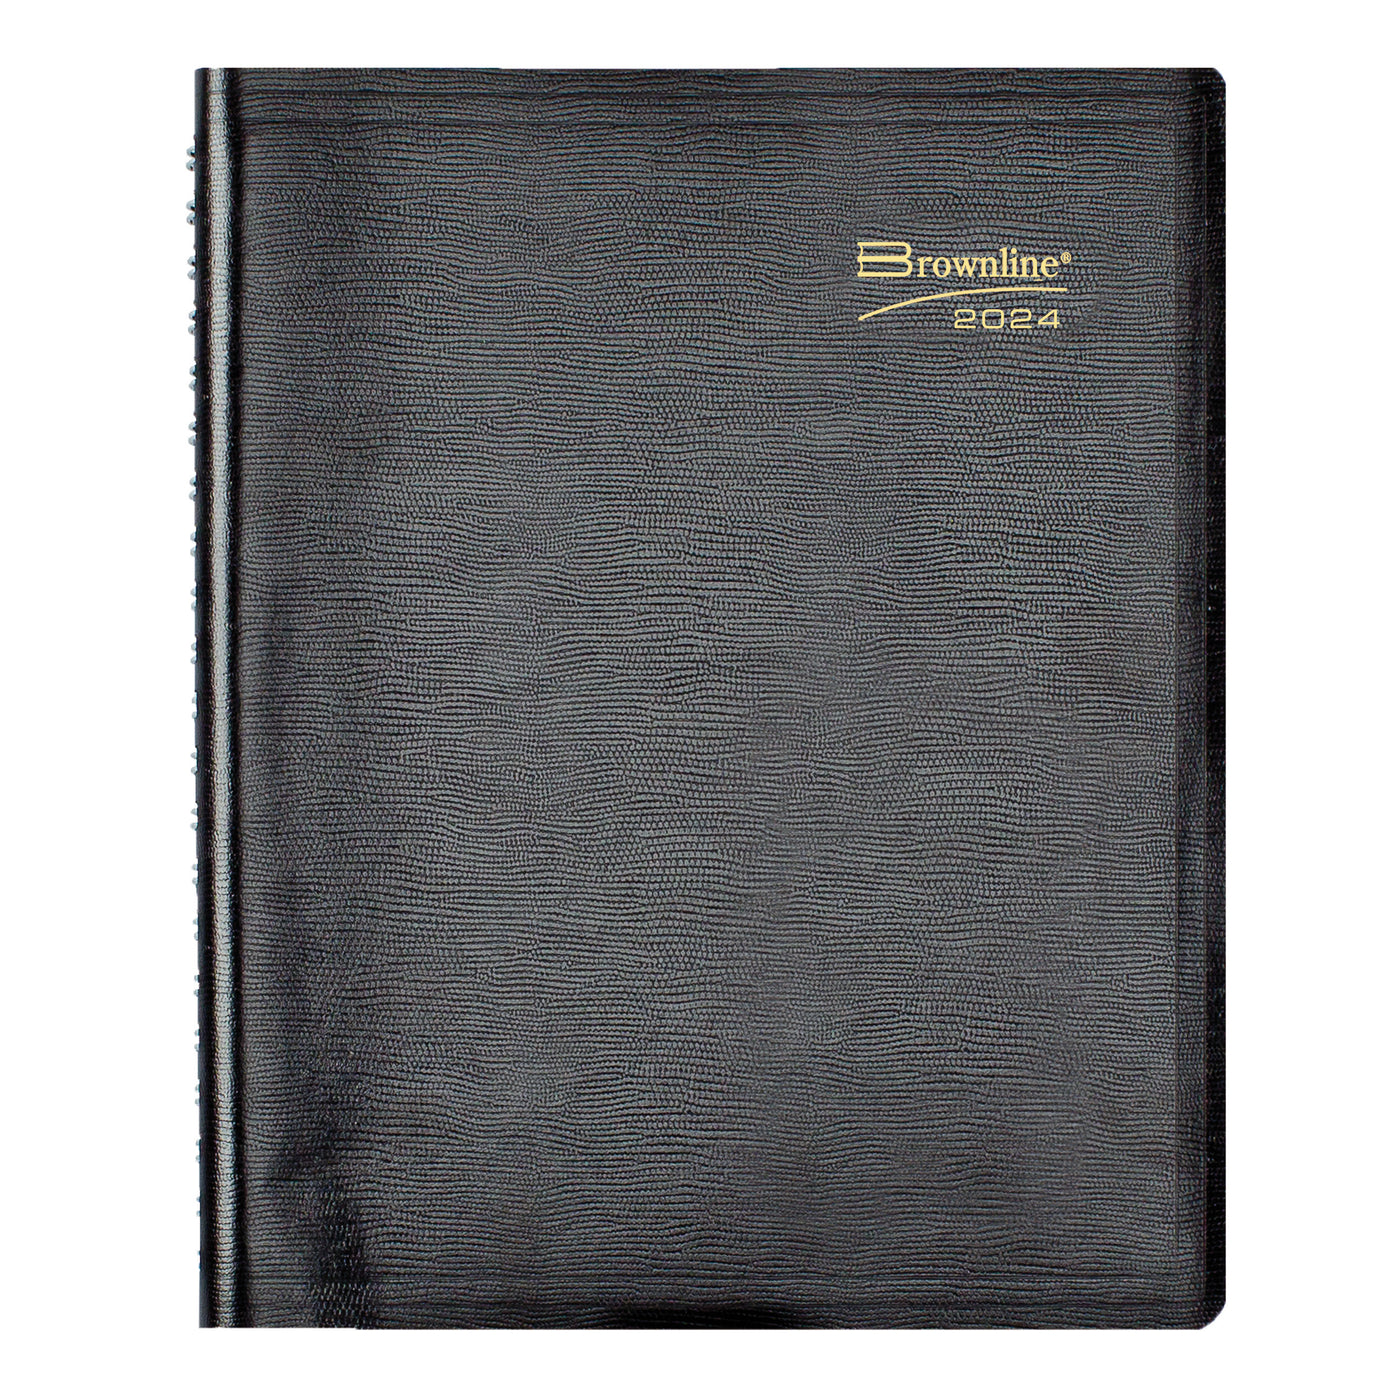 Brownline Daily Appoinment Book - 8 1/2" x 11" - Black Cover